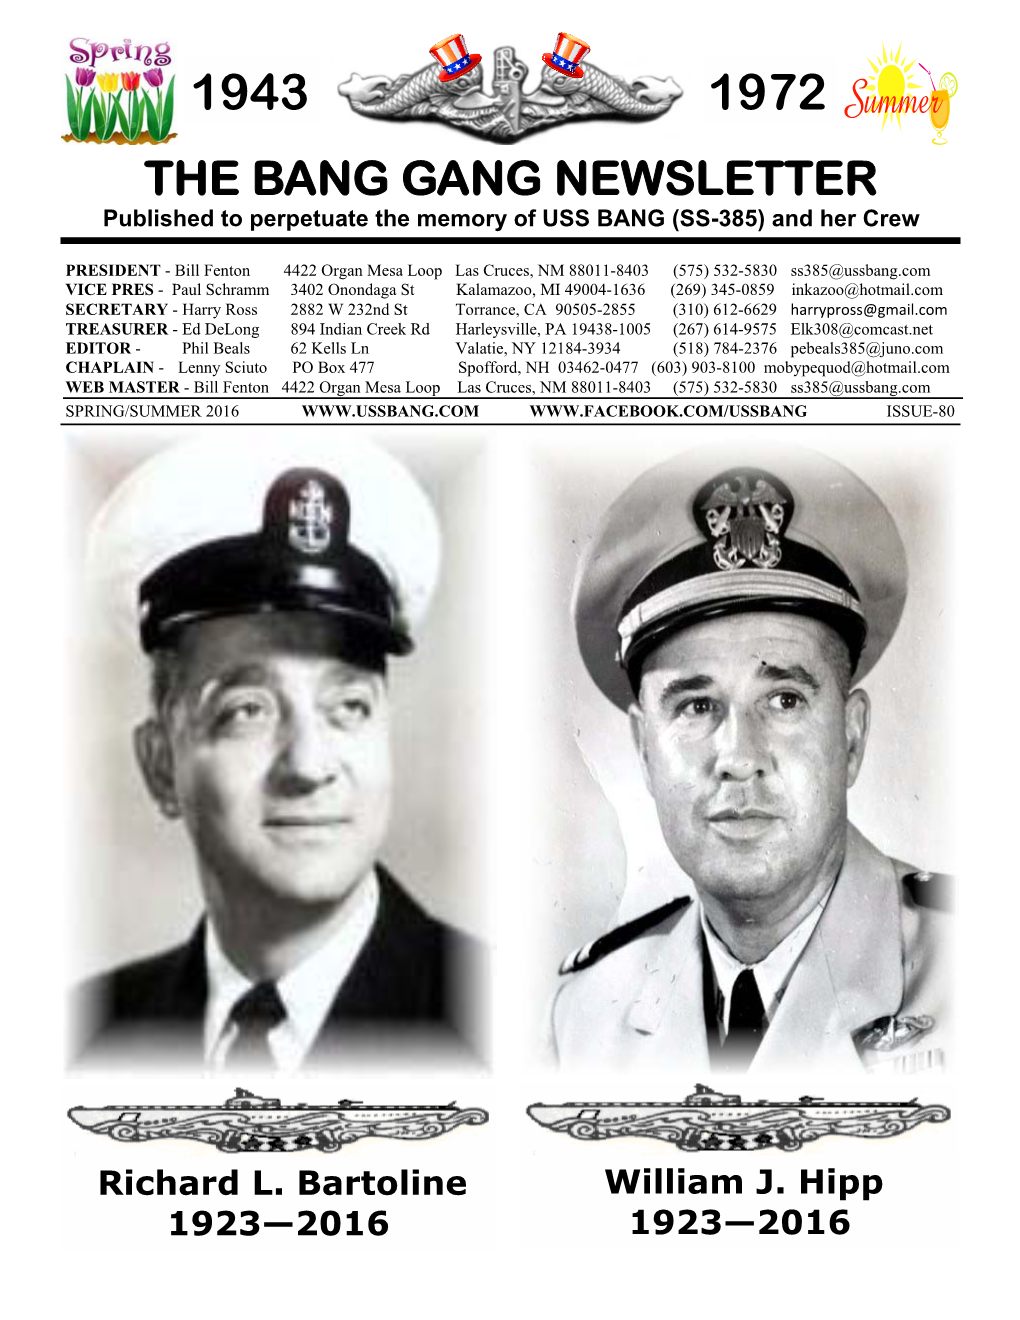 THE BANG GANG NEWSLETTER Published to Perpetuate the Memory of USS BANG (SS-385) and Her Crew